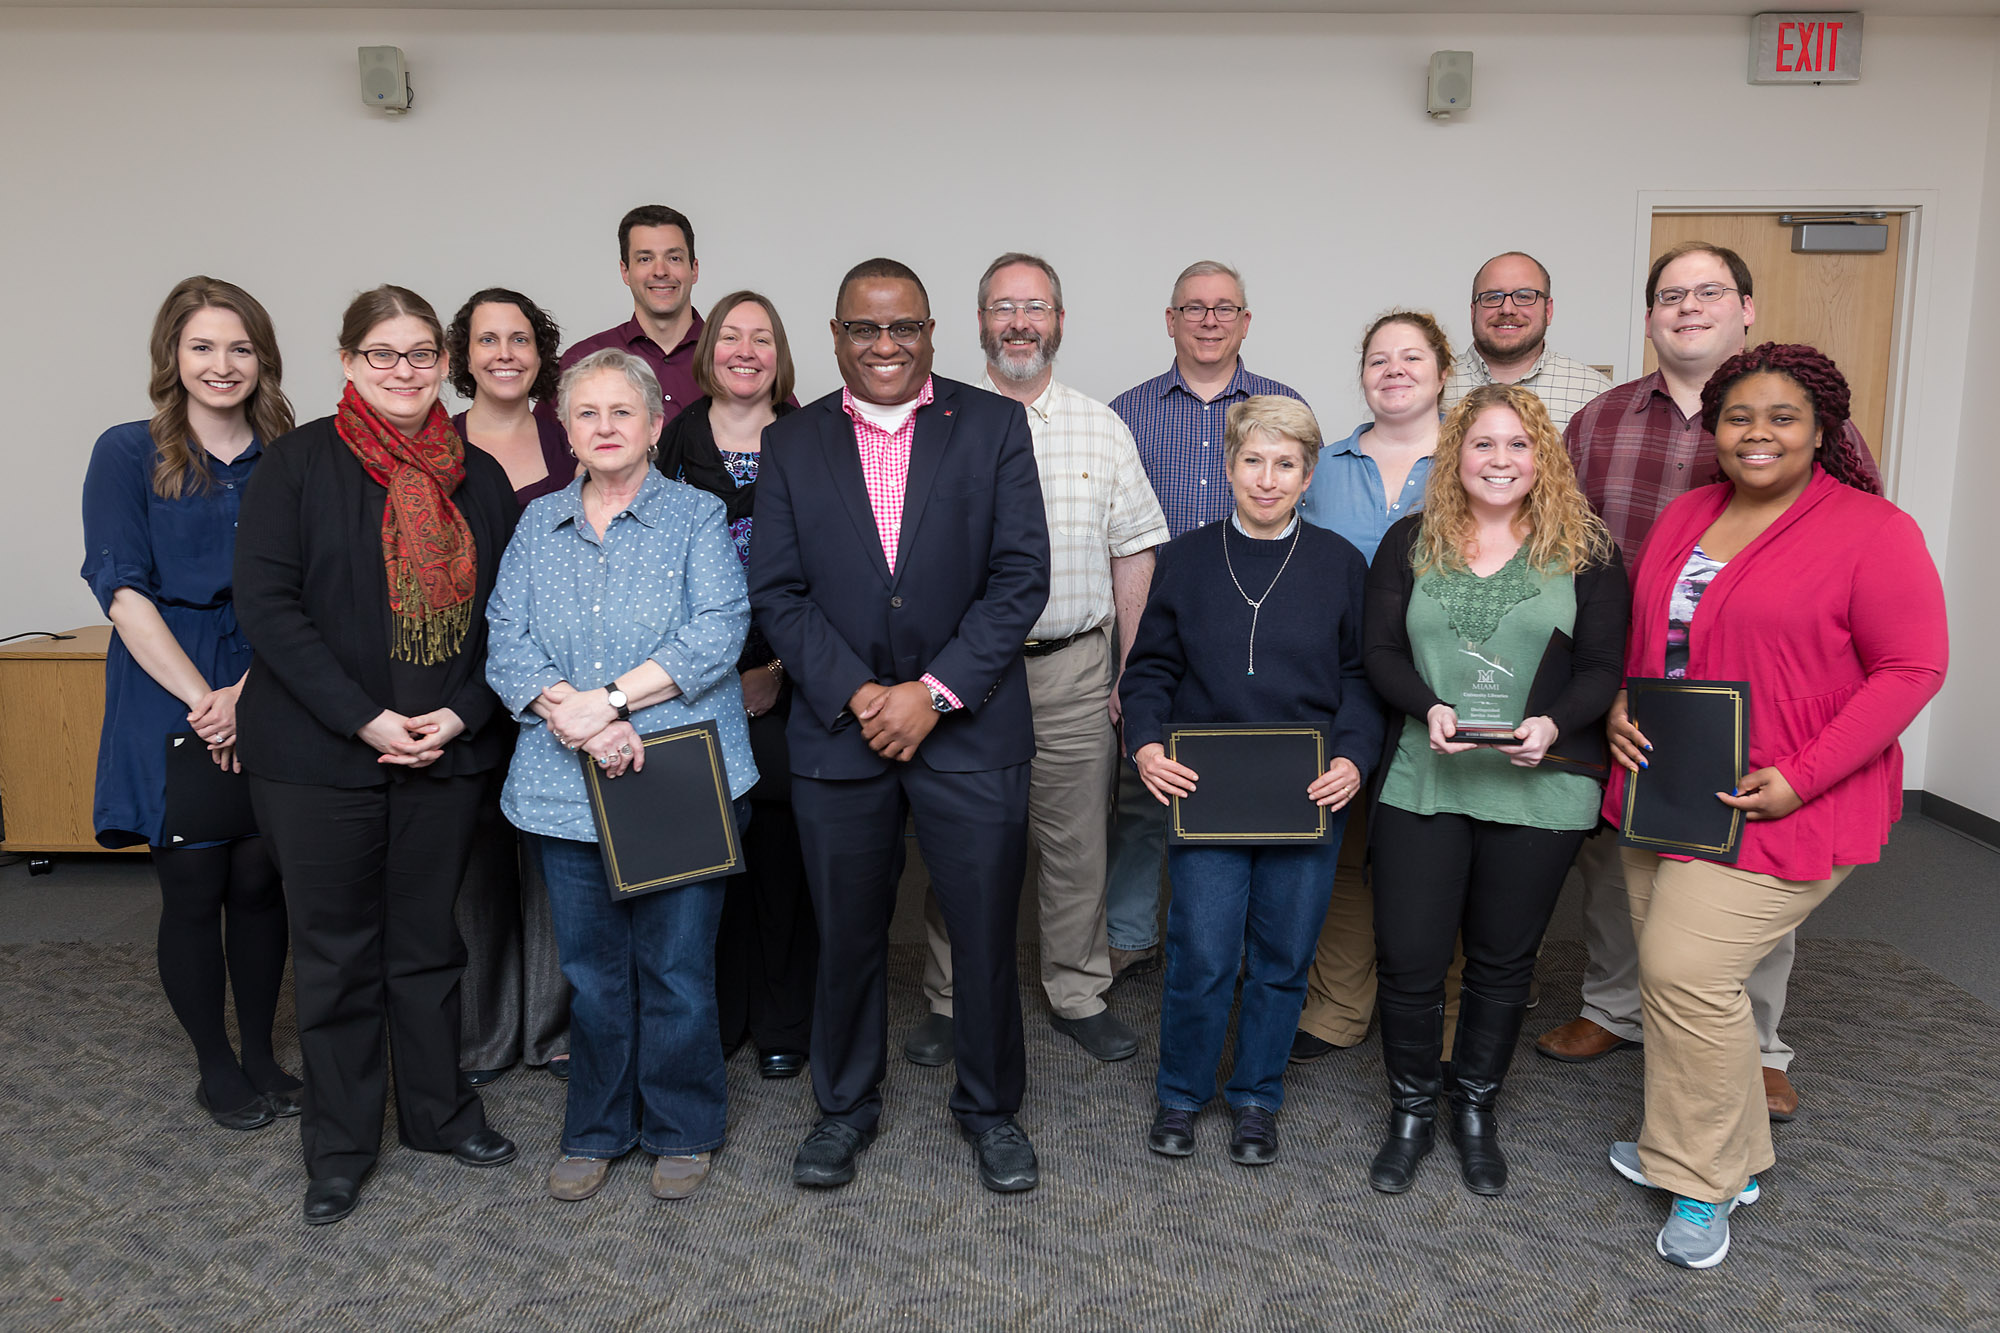 The 2018 nominees for the Libraries Distinguished Service Award gather for a group photograph with Dean and University Librarian Jerome Conley